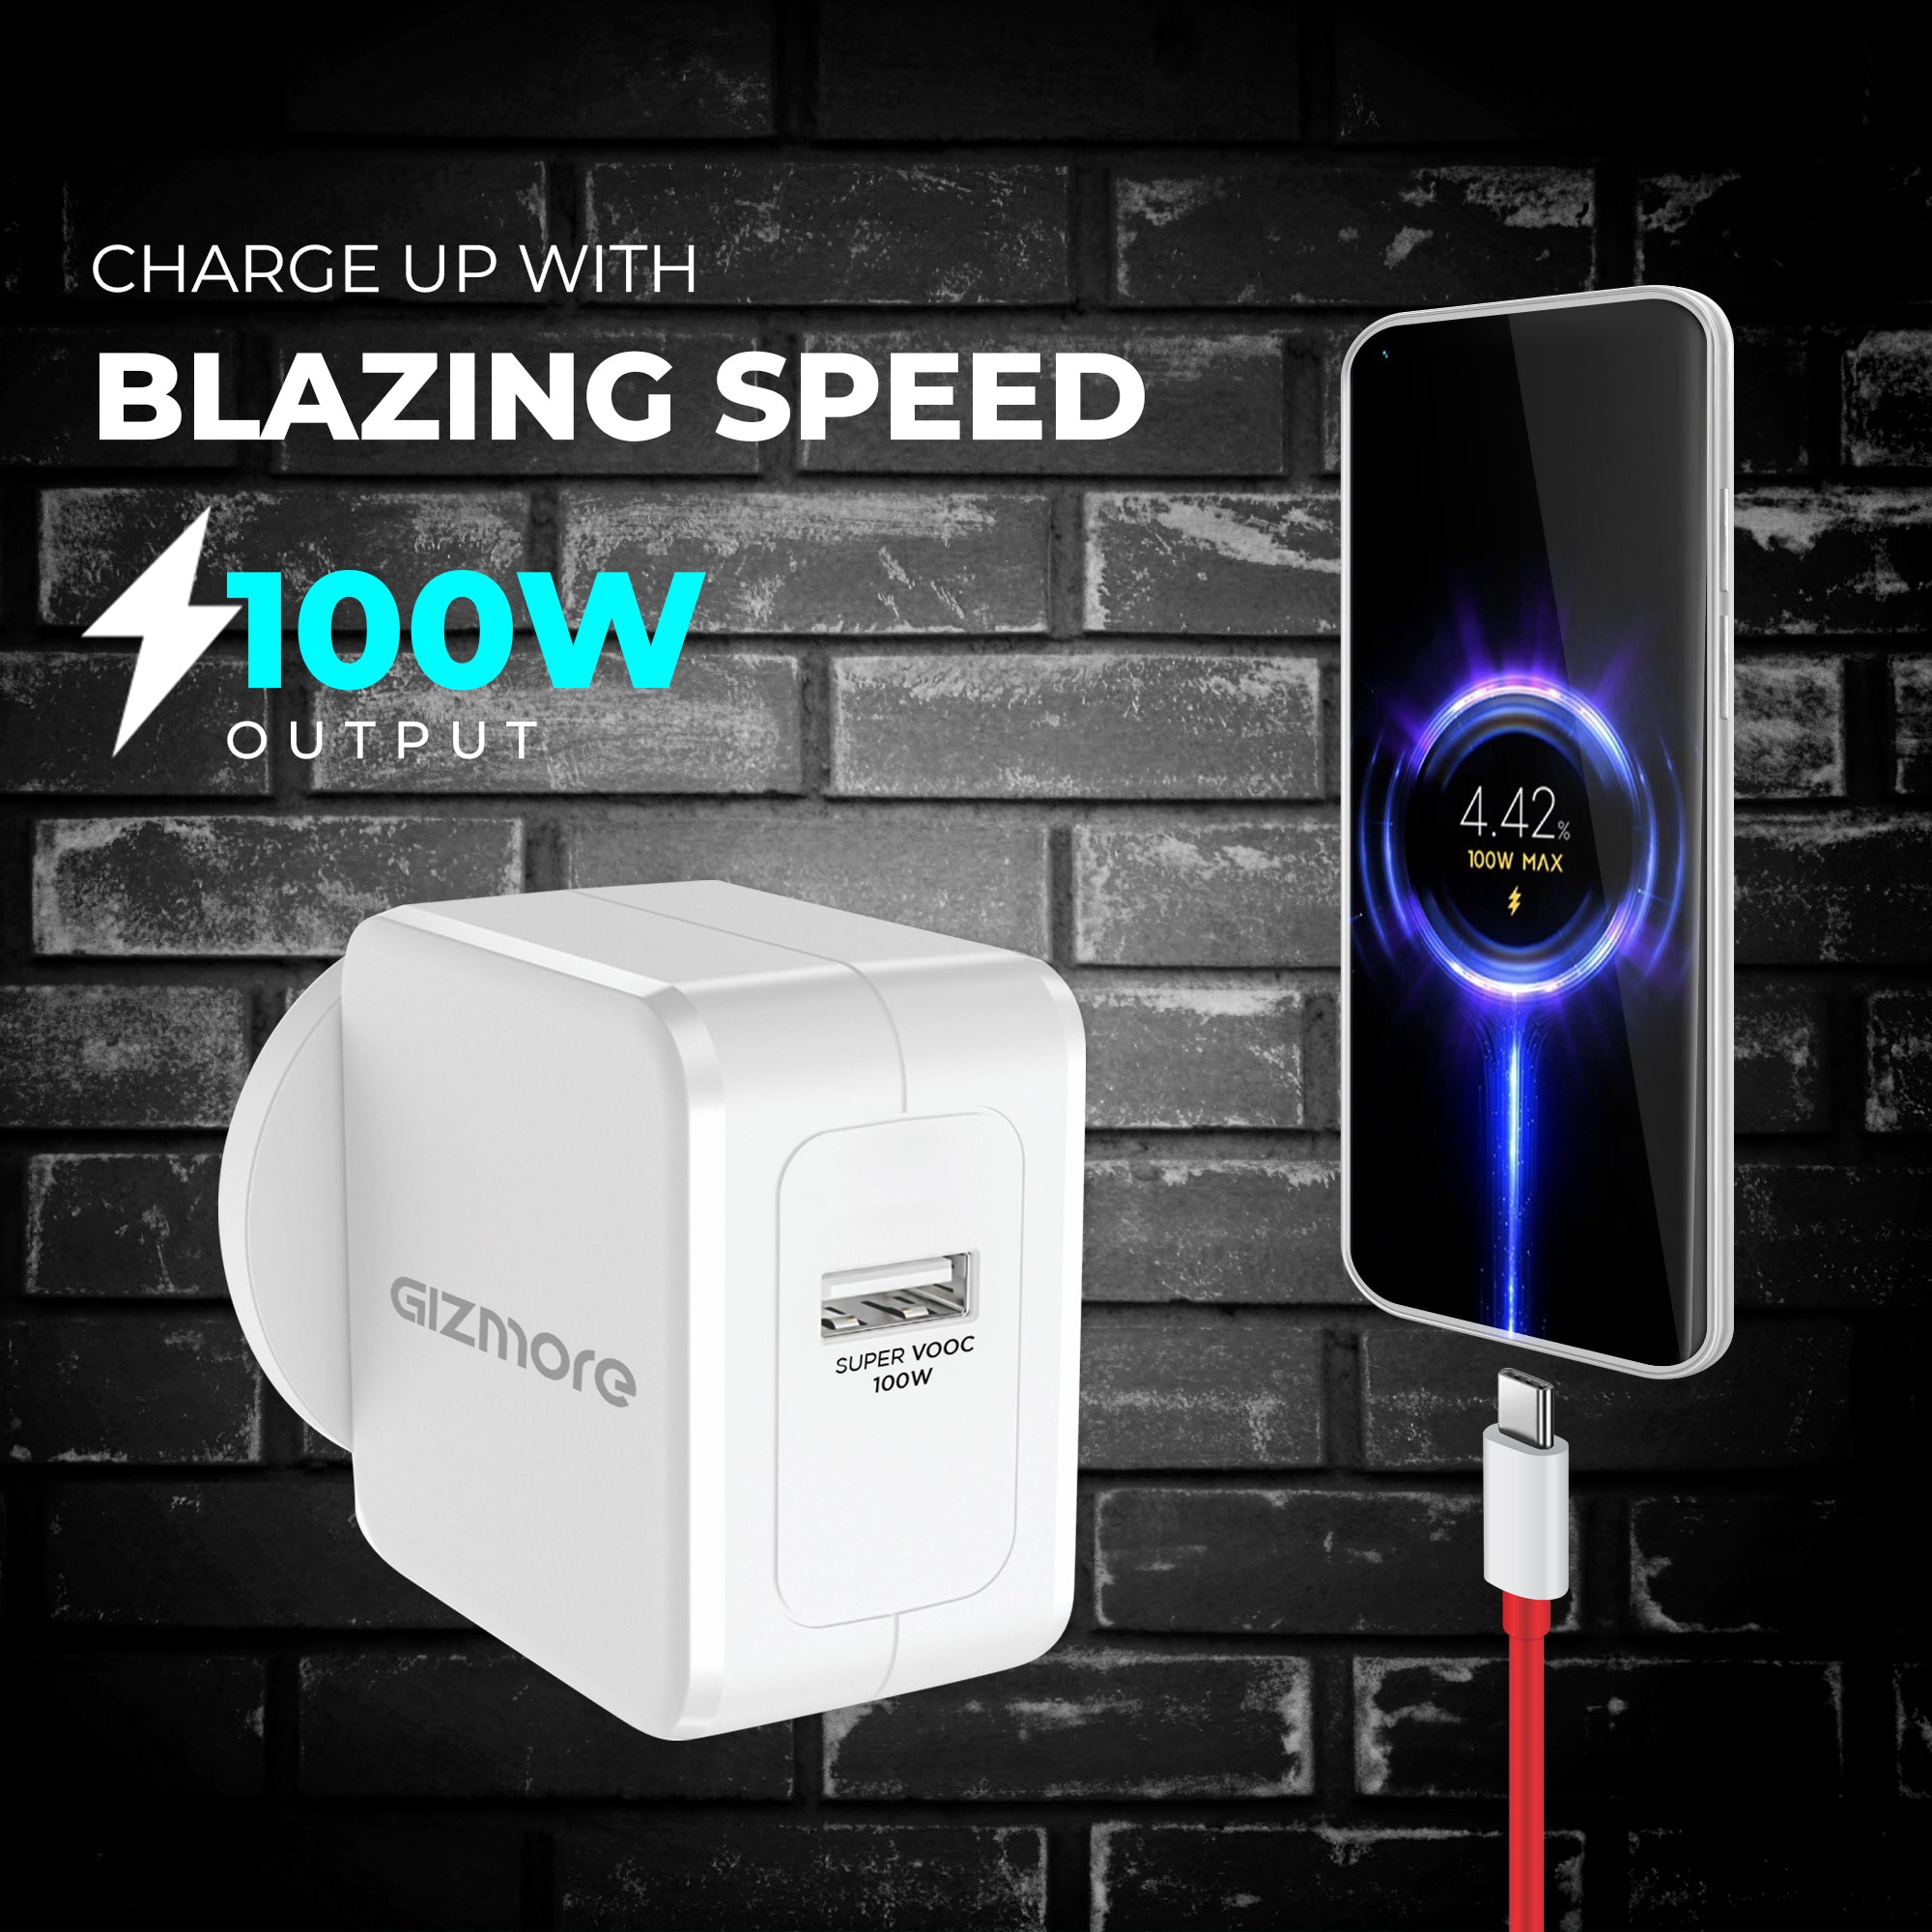 GIZMORE PA100 ULTRA 100W Super VOOC USB Fast Charger Adapter Compatible with All Smartphone, Compact & Lightweight with Secure Charging, Versatile Protocol QC2.0/QC3.0/DCP, AFC and FCP with Cable